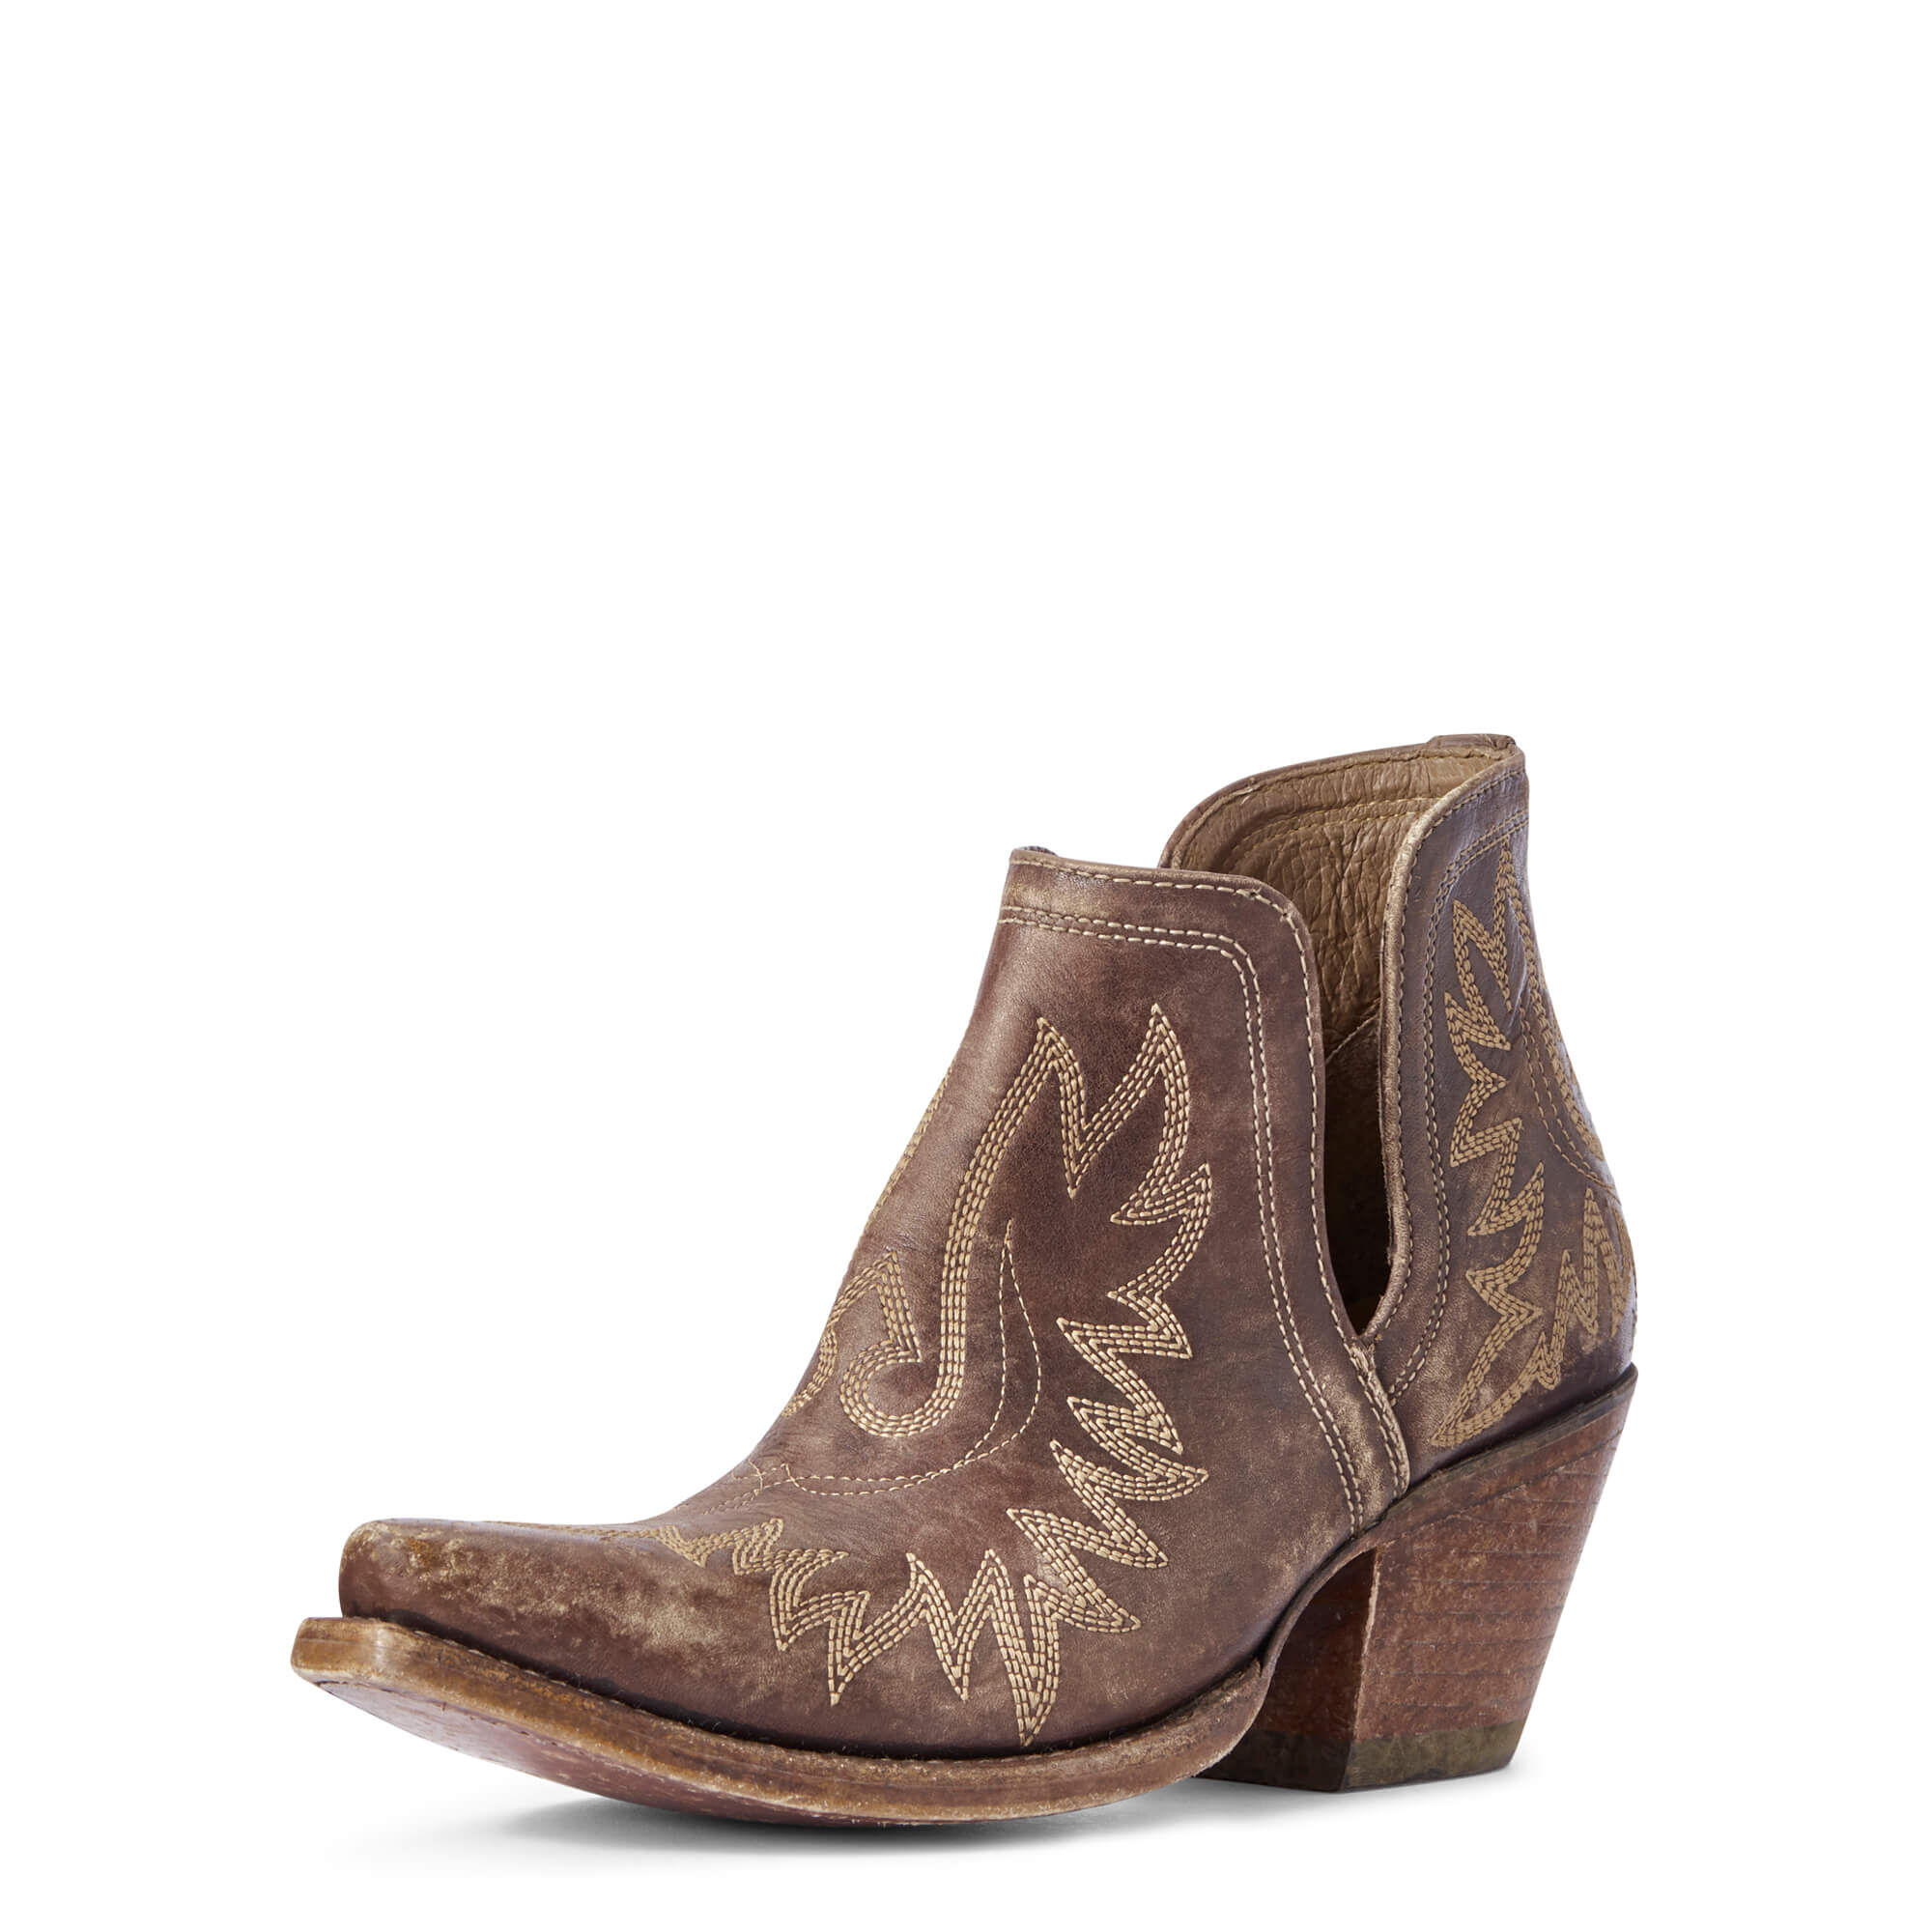 Women's Dixon Western Boots in Naturally Distressed Brown Leather  by Ariat